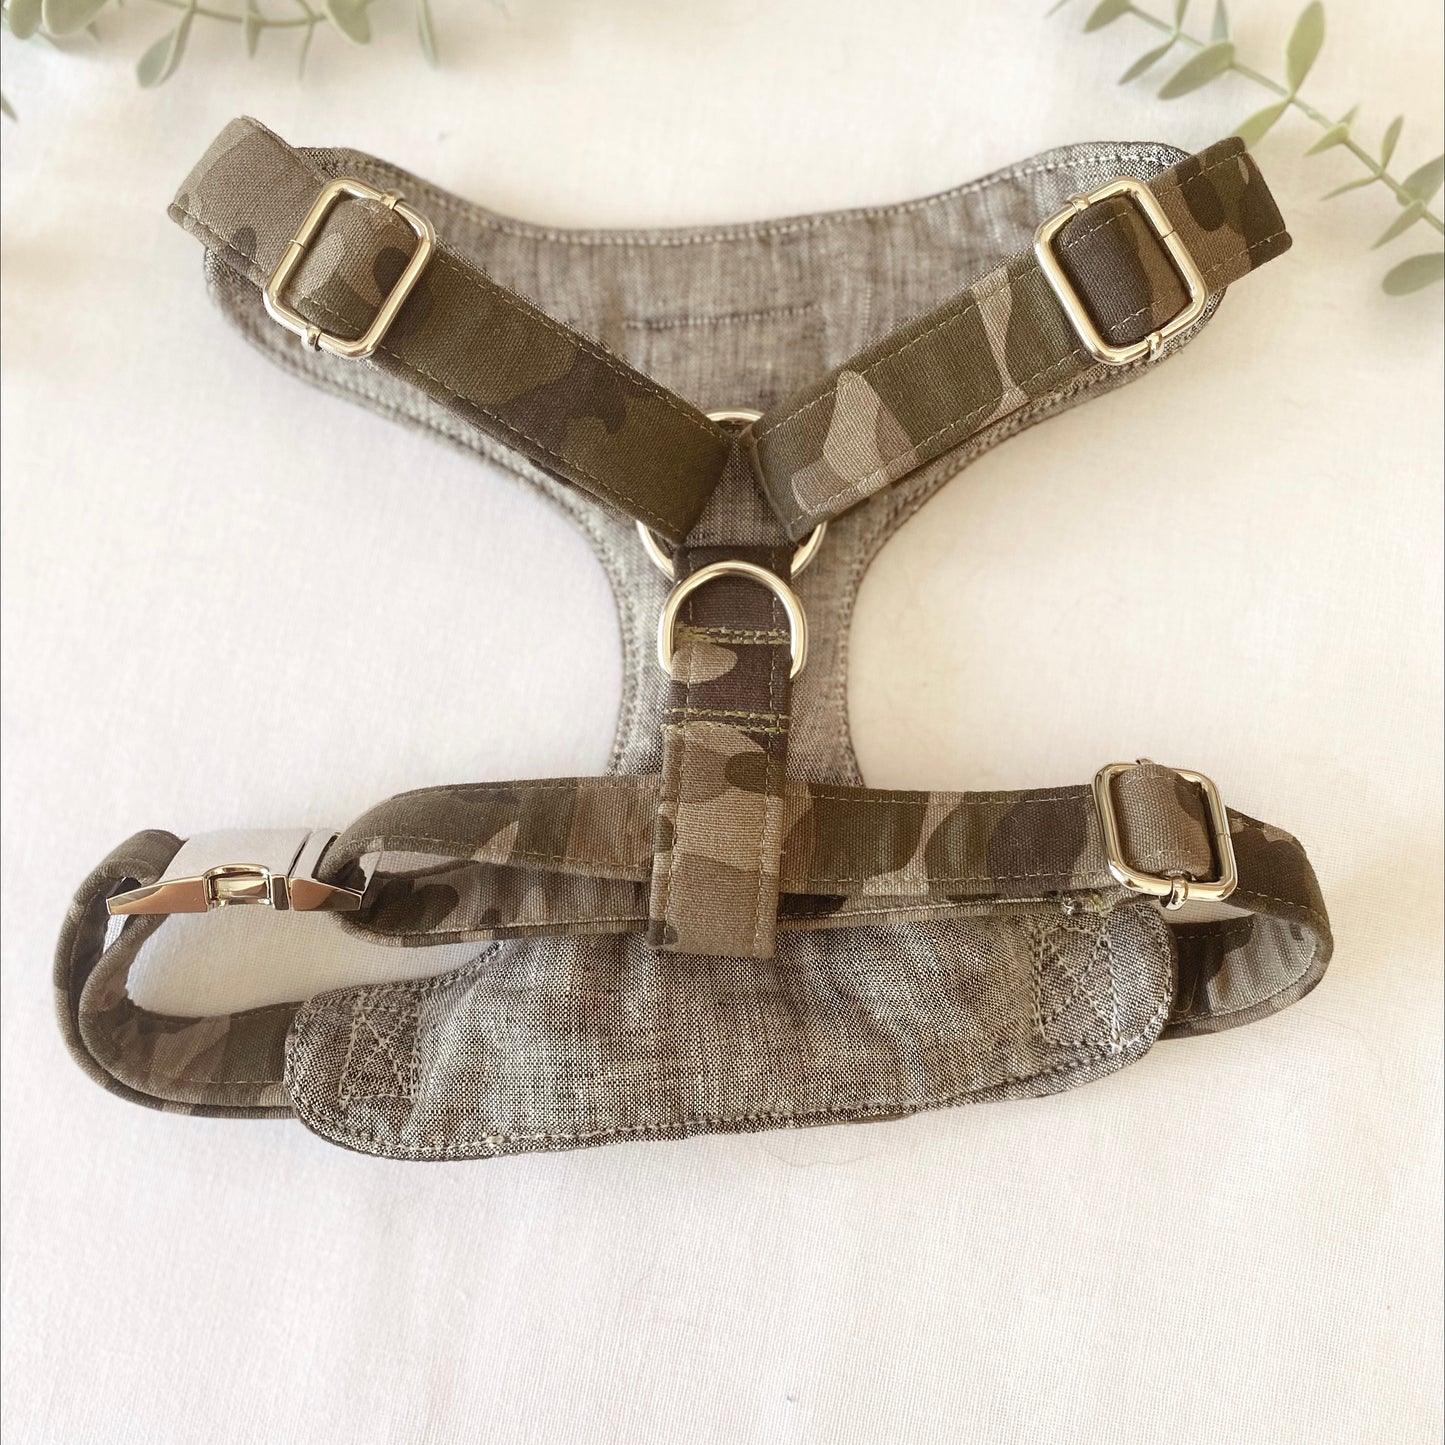 The 'Hunter' Chest Harness Bundle